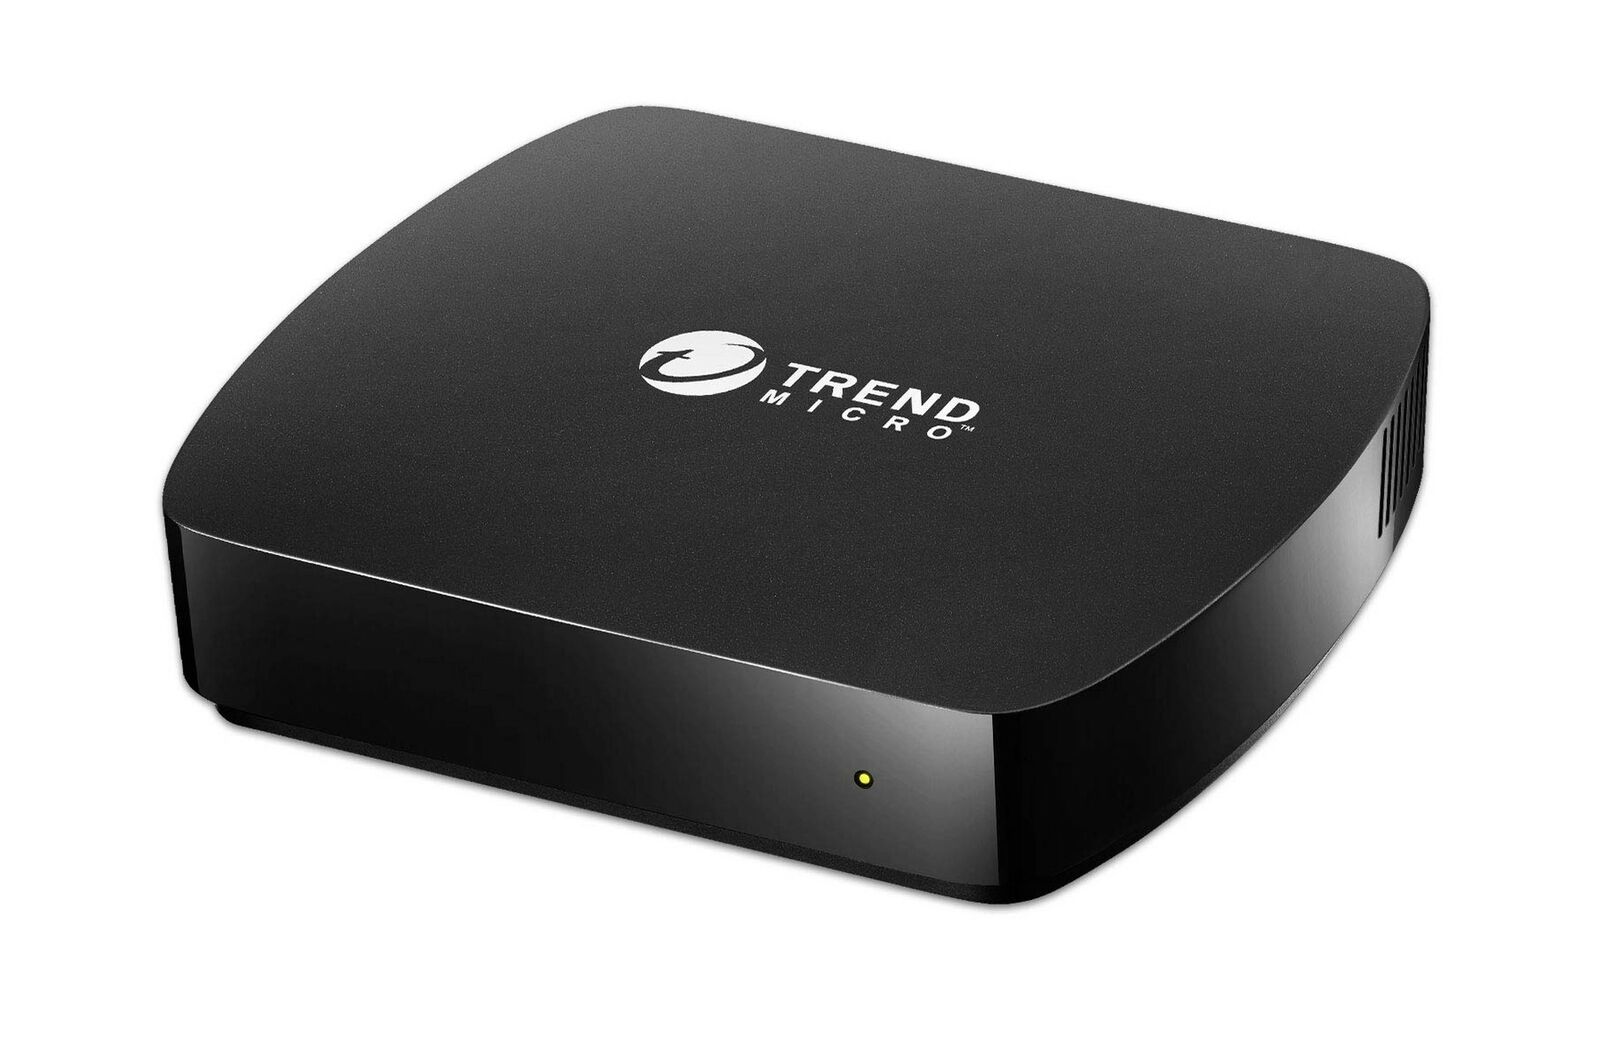 Trend Micro Home Network Security Firewall Device - Prevent Privacy Leaks, Pa...